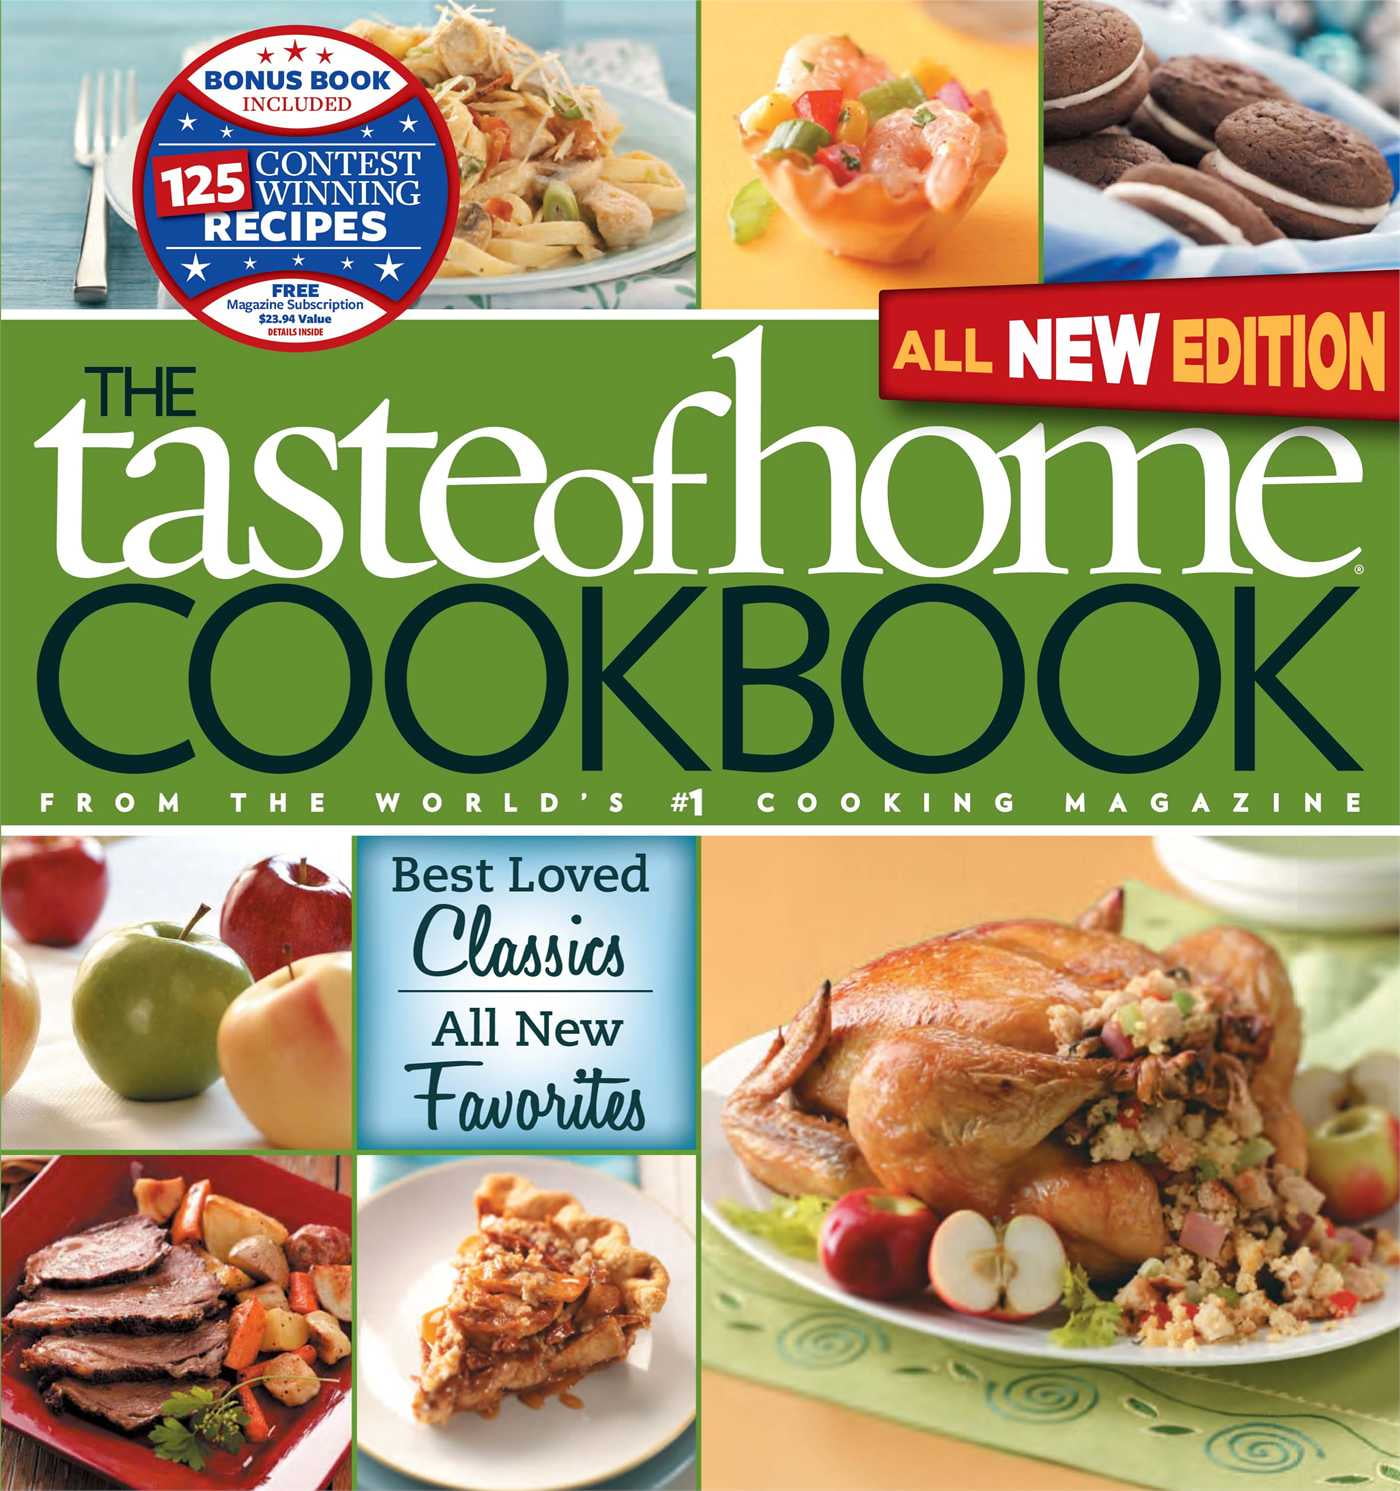 taste-of-home-cookbook-all-new-3rd-edition-with-contest-winners